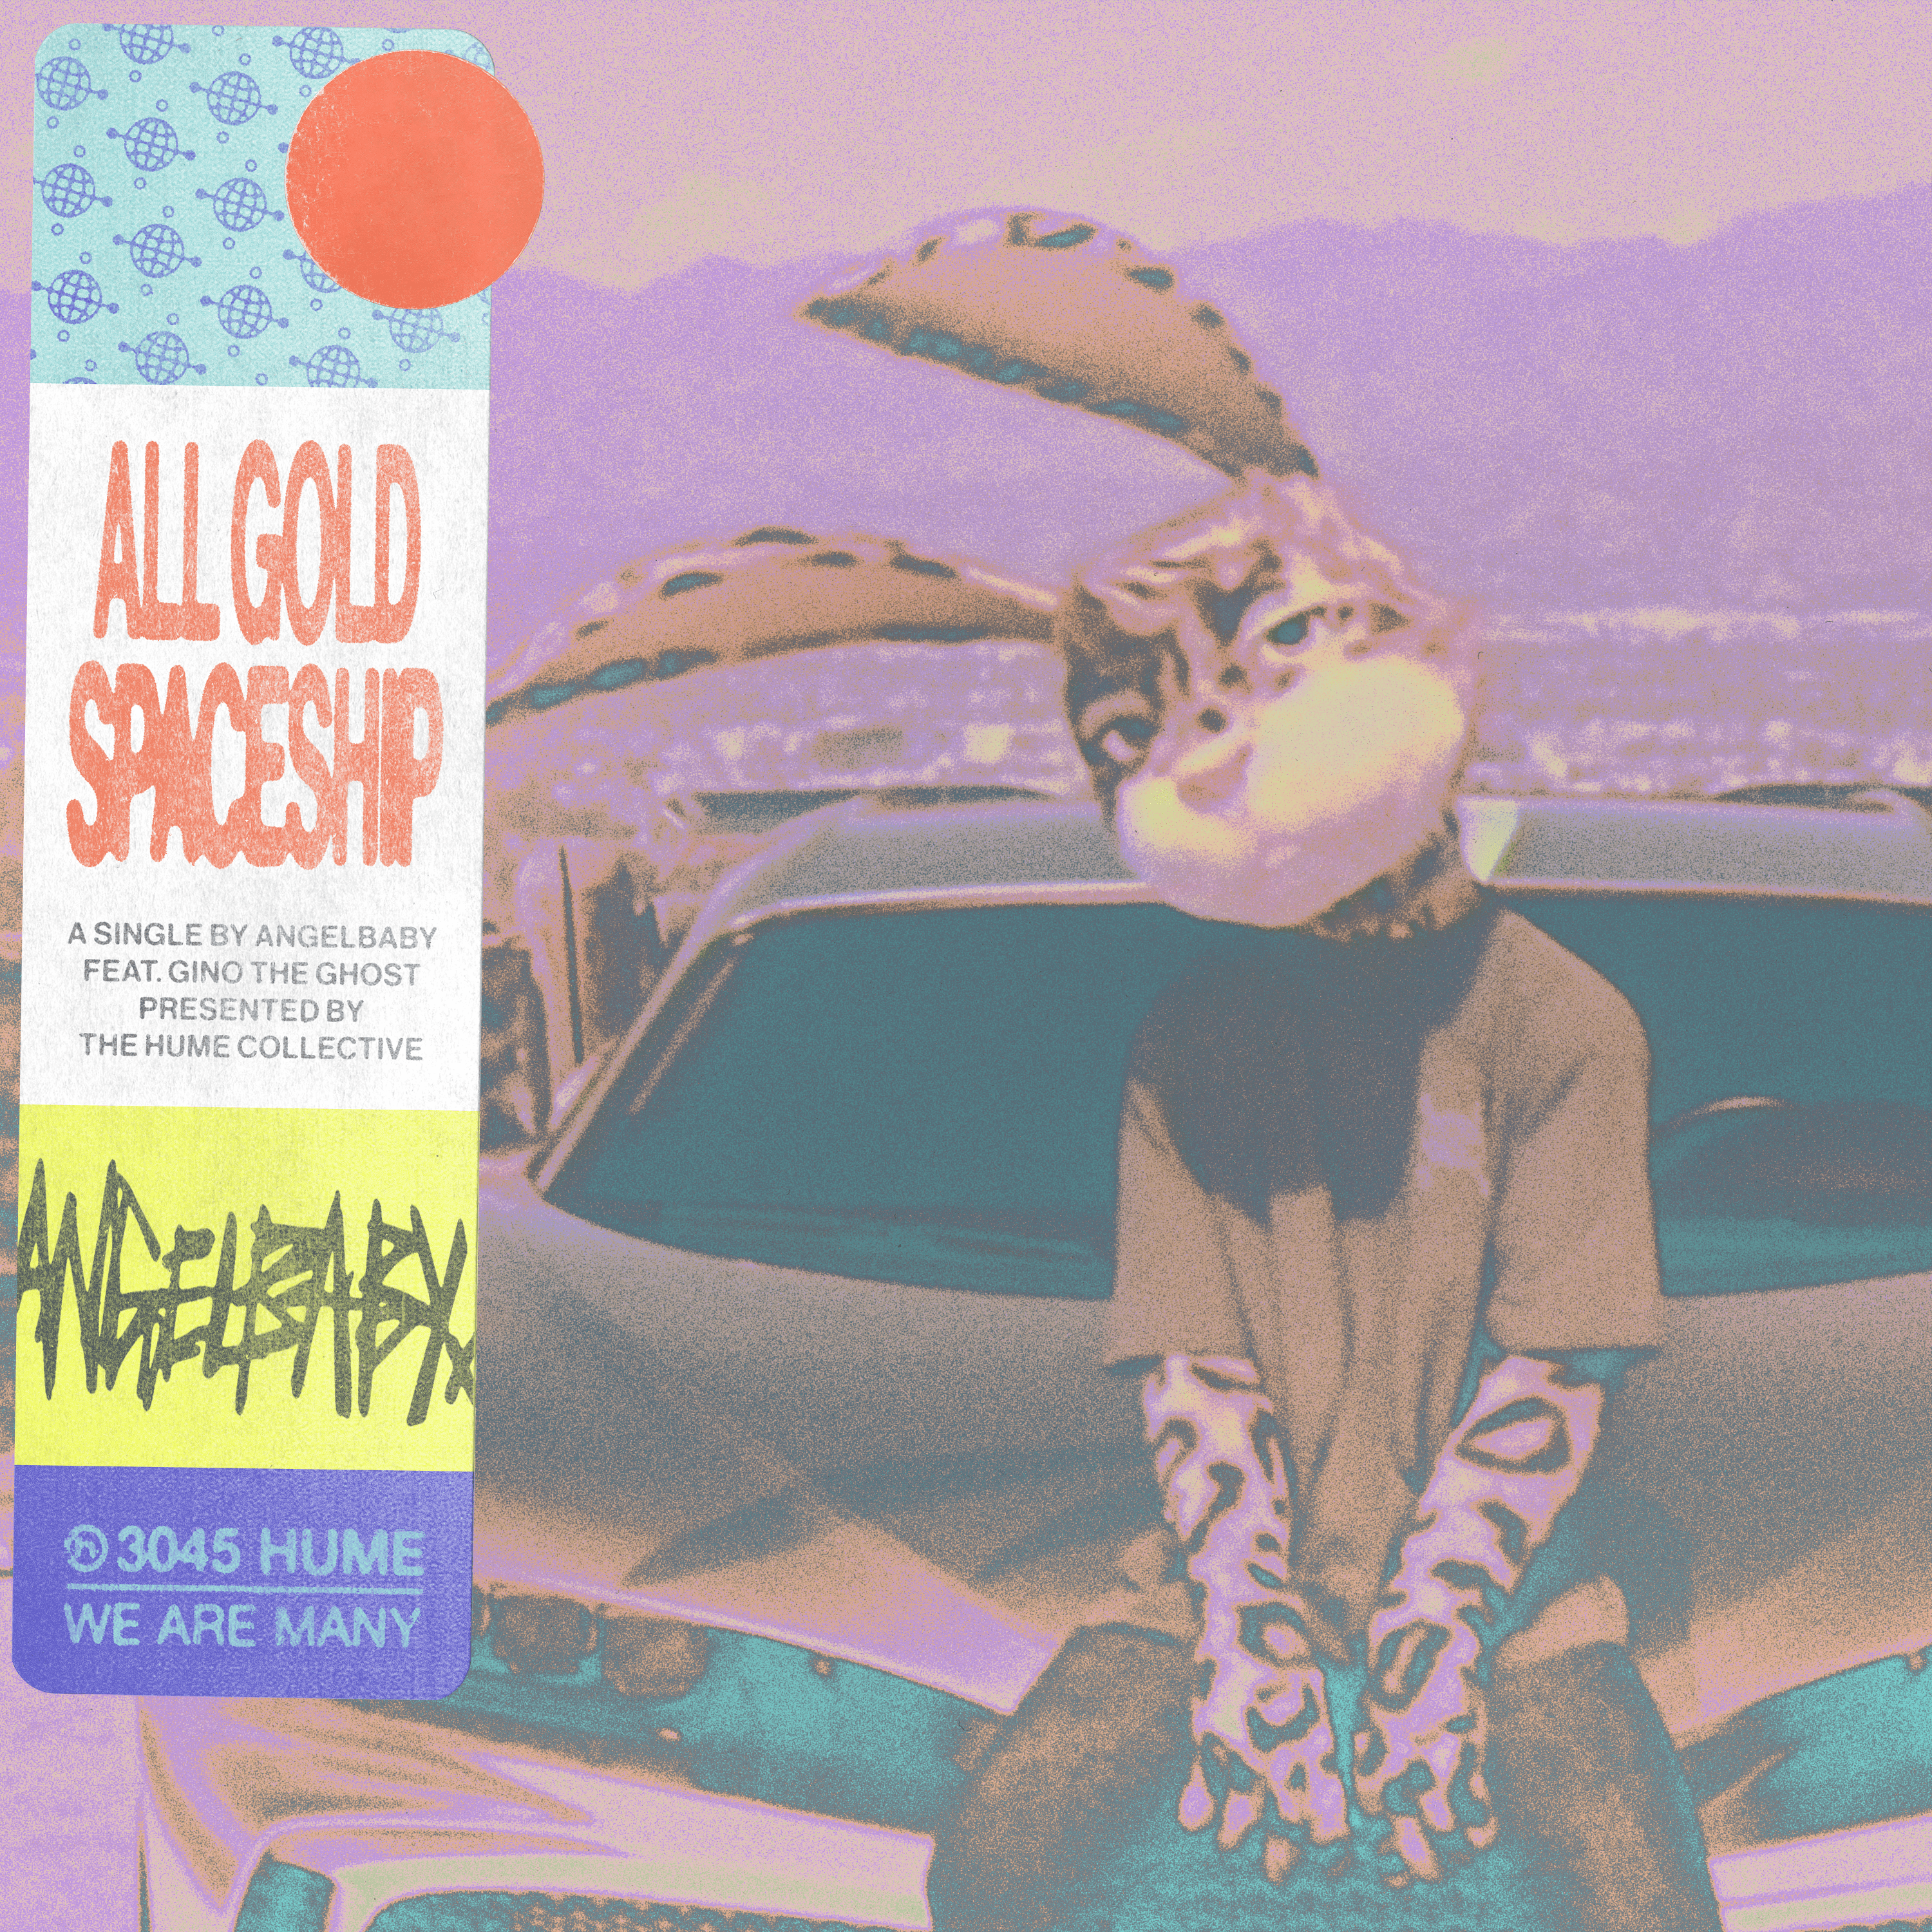 All Gold Spaceship #159